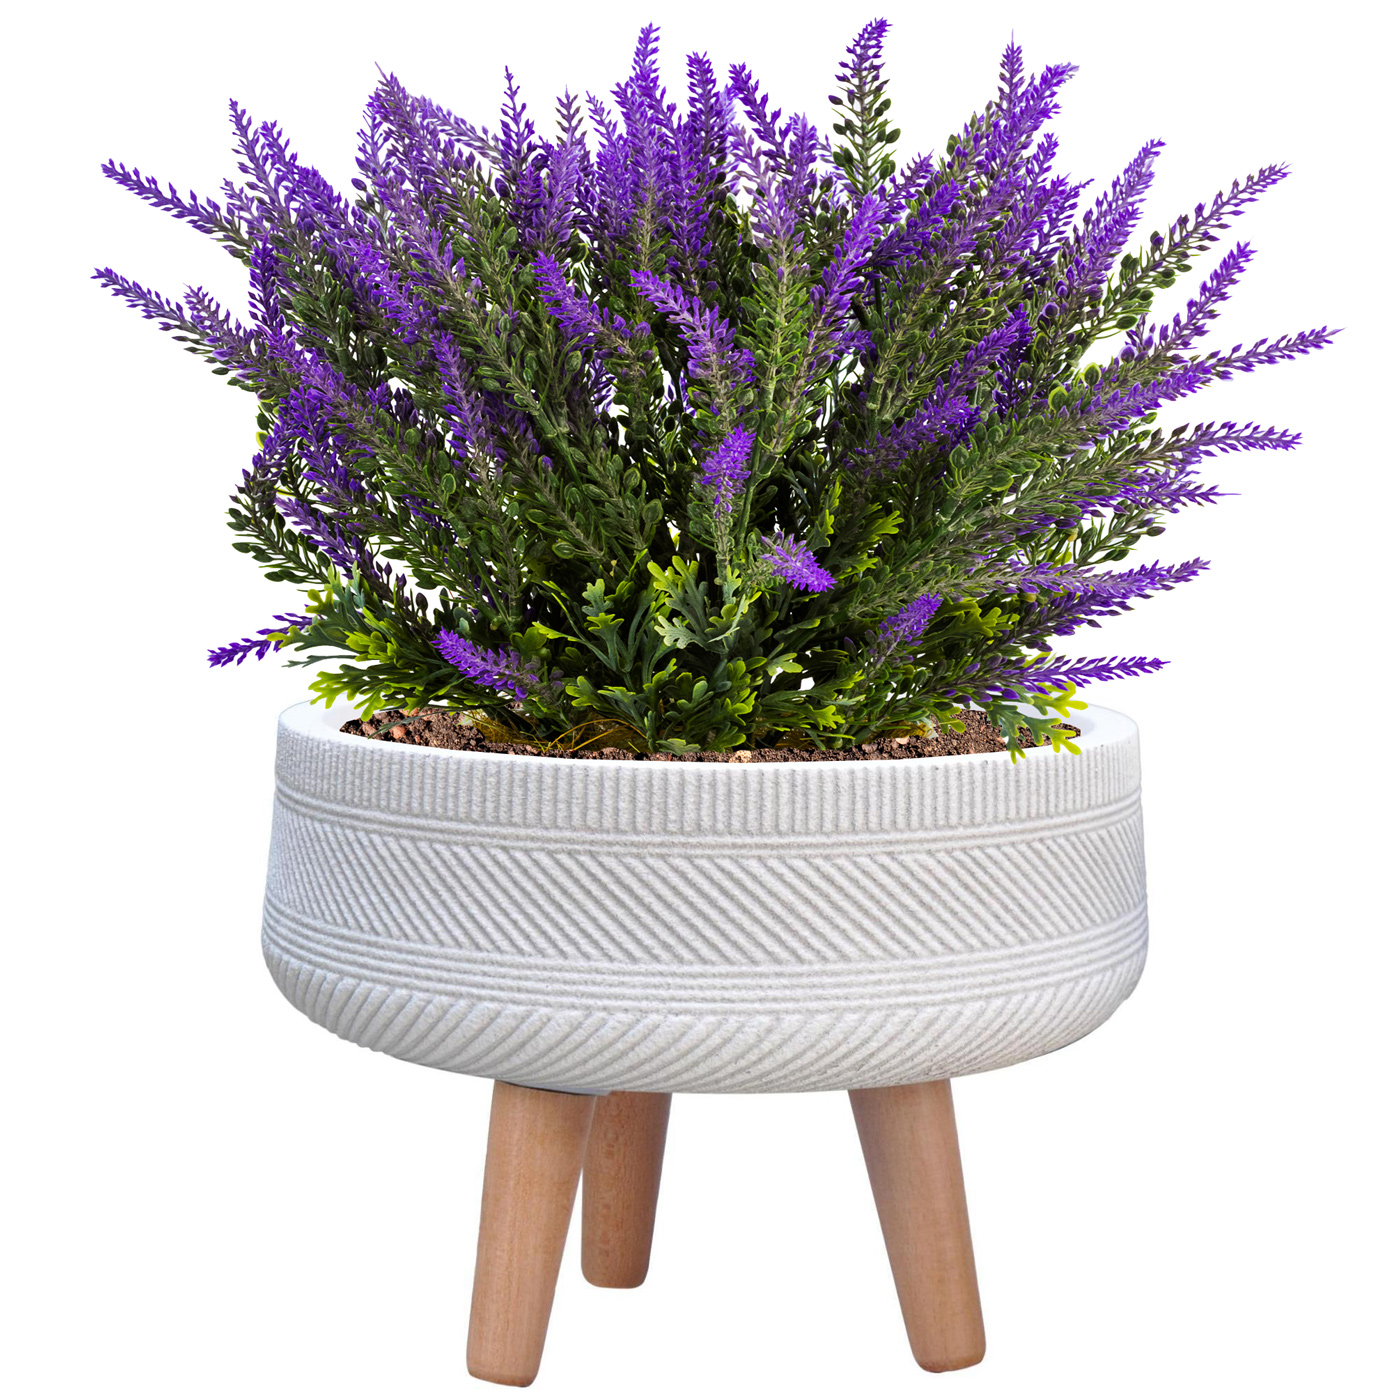 Striped White Tray Round Indoor Planter with Legs D29.5 H22 cm, 5.9 ltrs Cap.